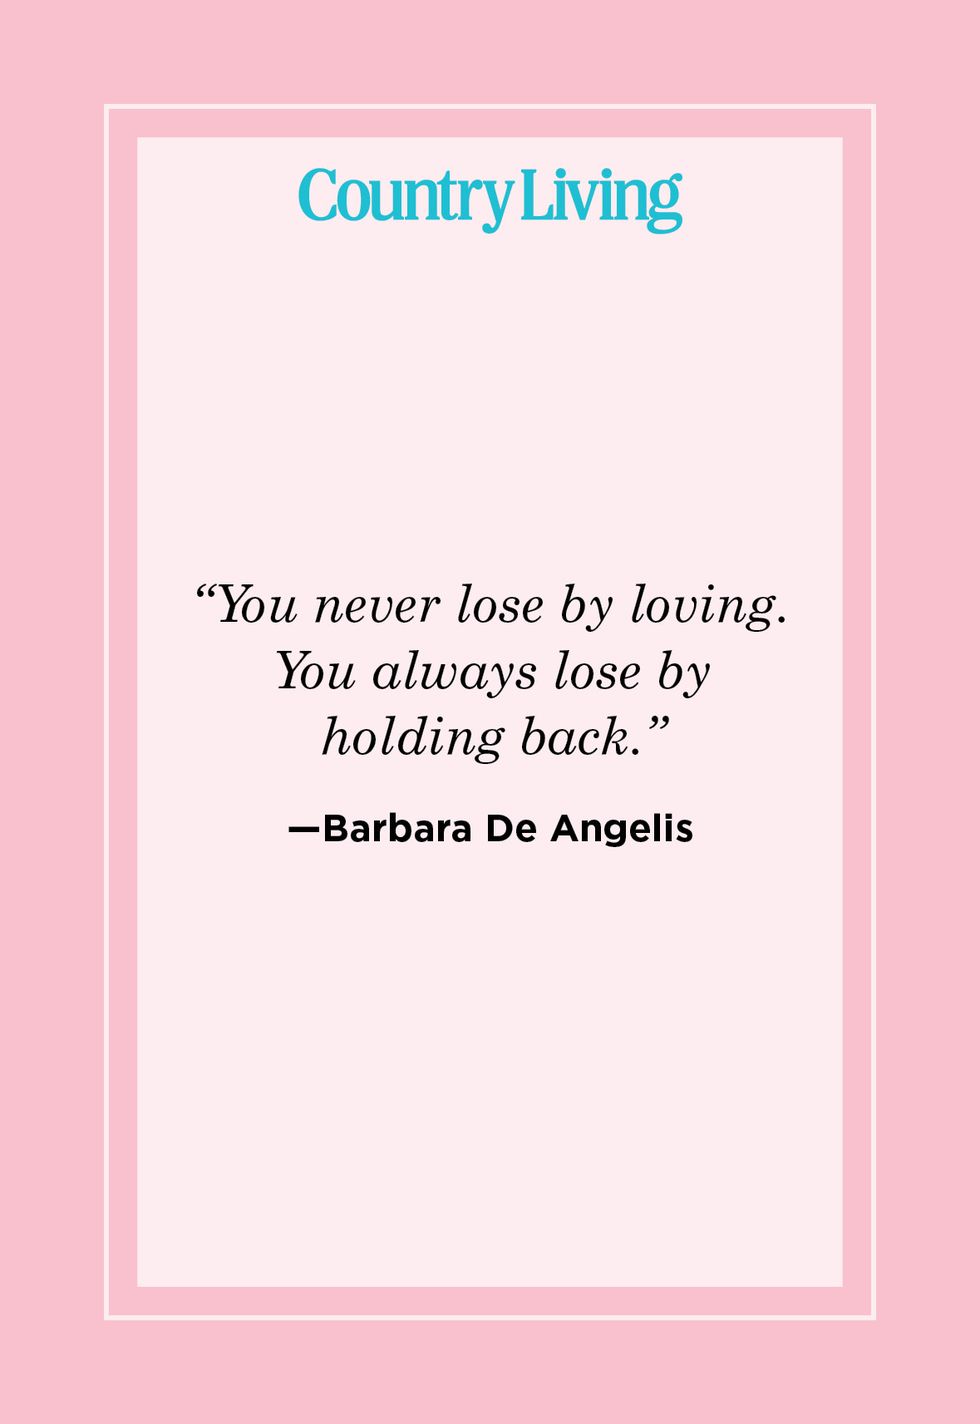 loving you quotes for him